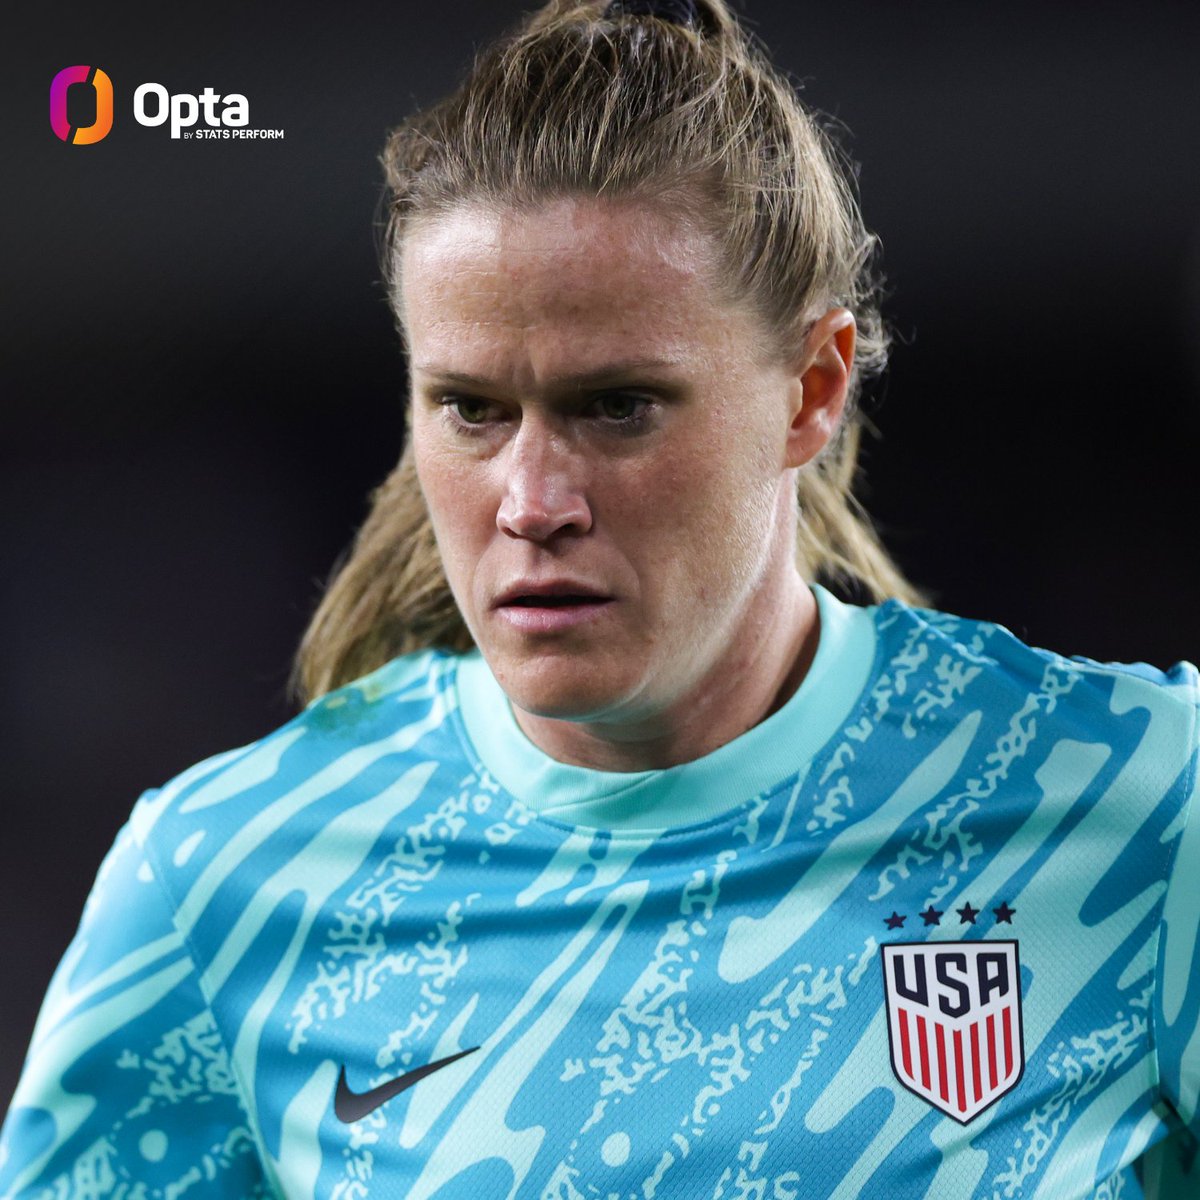 6 - Alyssa Naeher saved penalties from six different Canadian penalty takers in two shootouts this year. Homework.